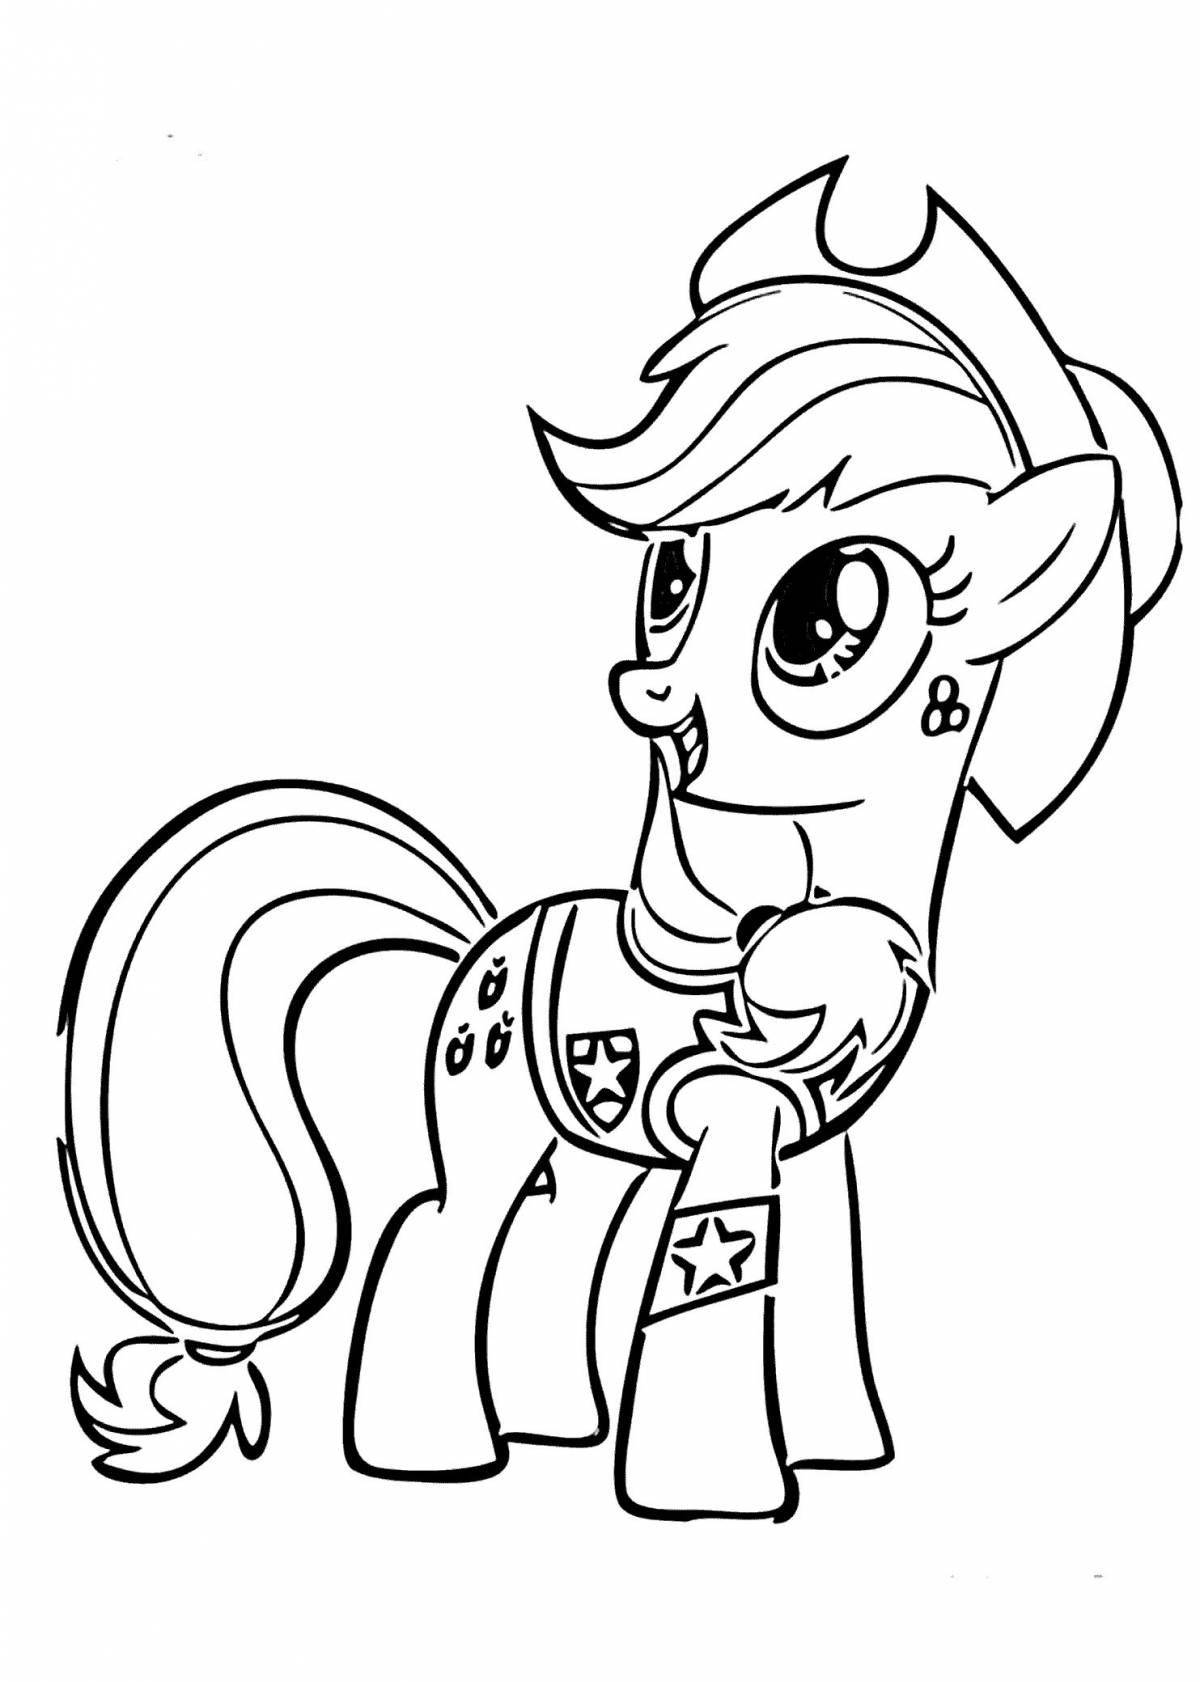 Applejack shining pony coloring page